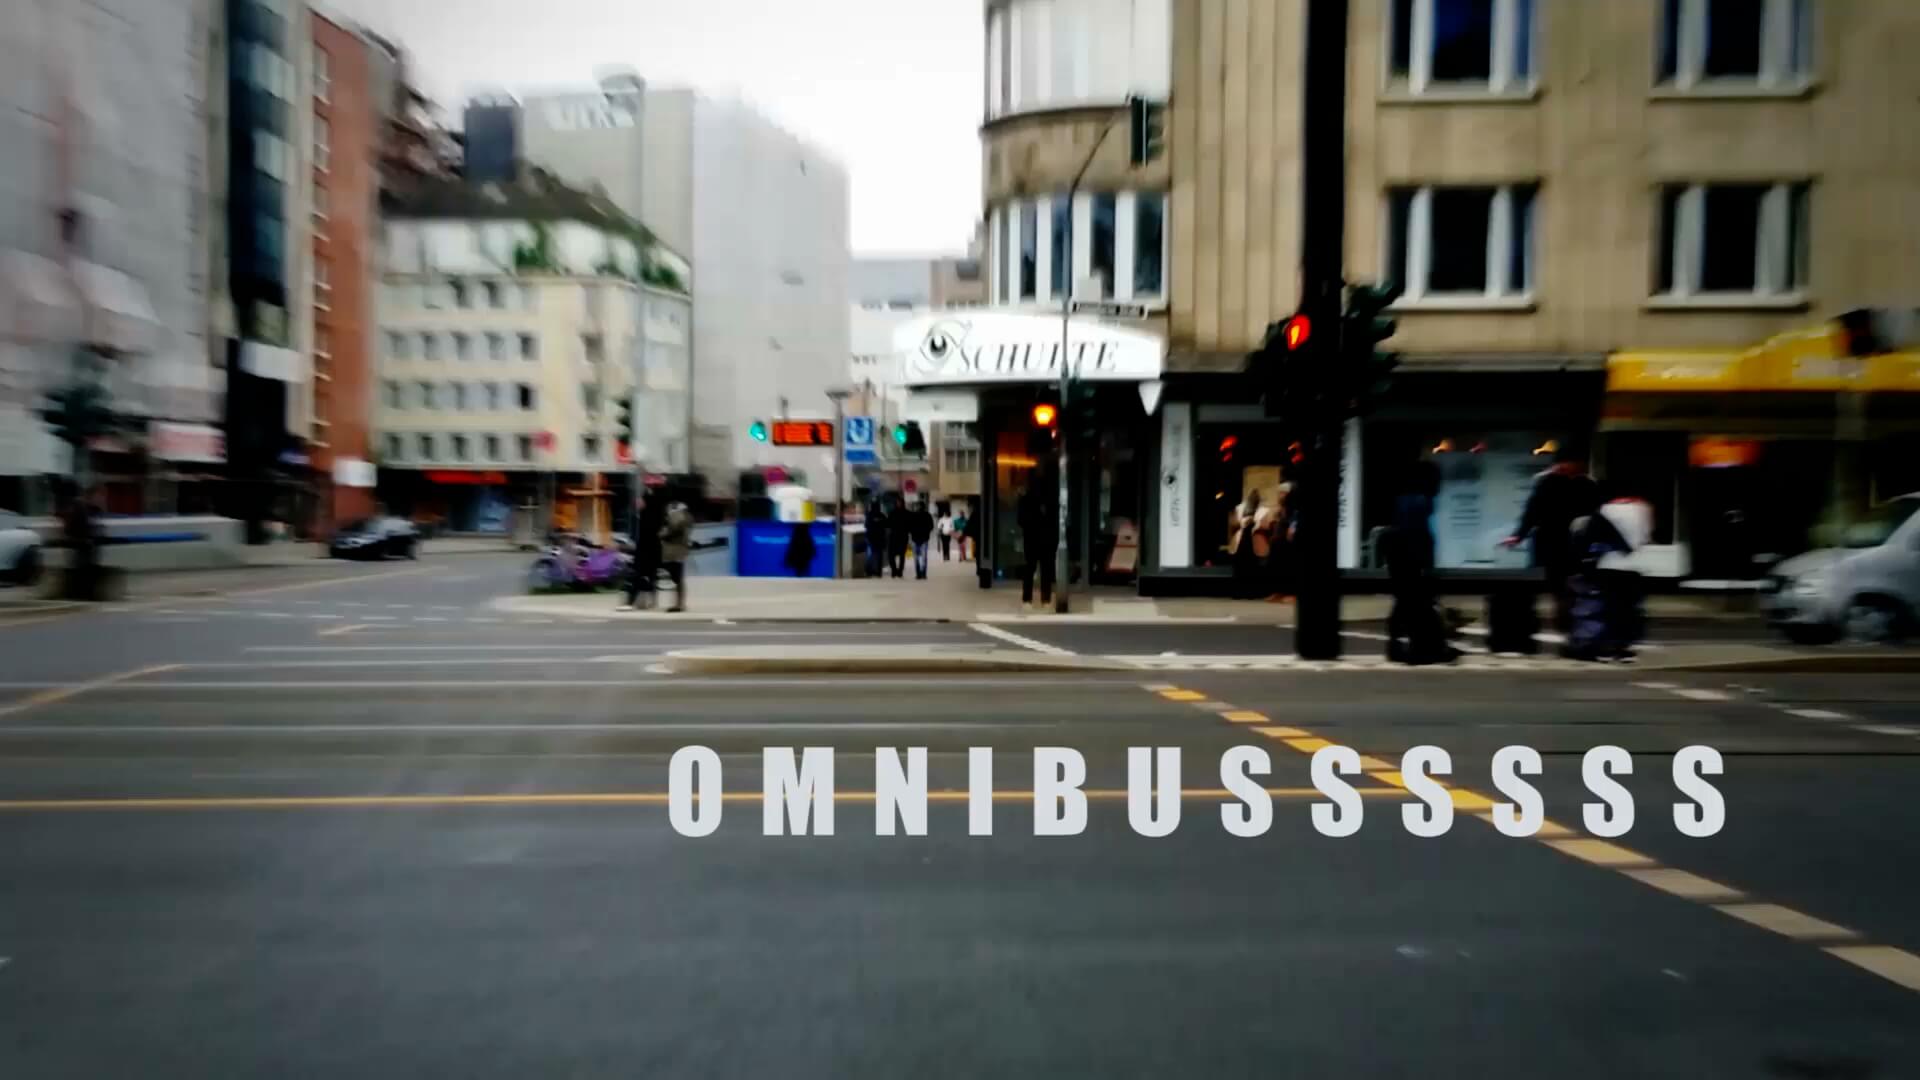 You are currently viewing OMNIBUSSSSSS